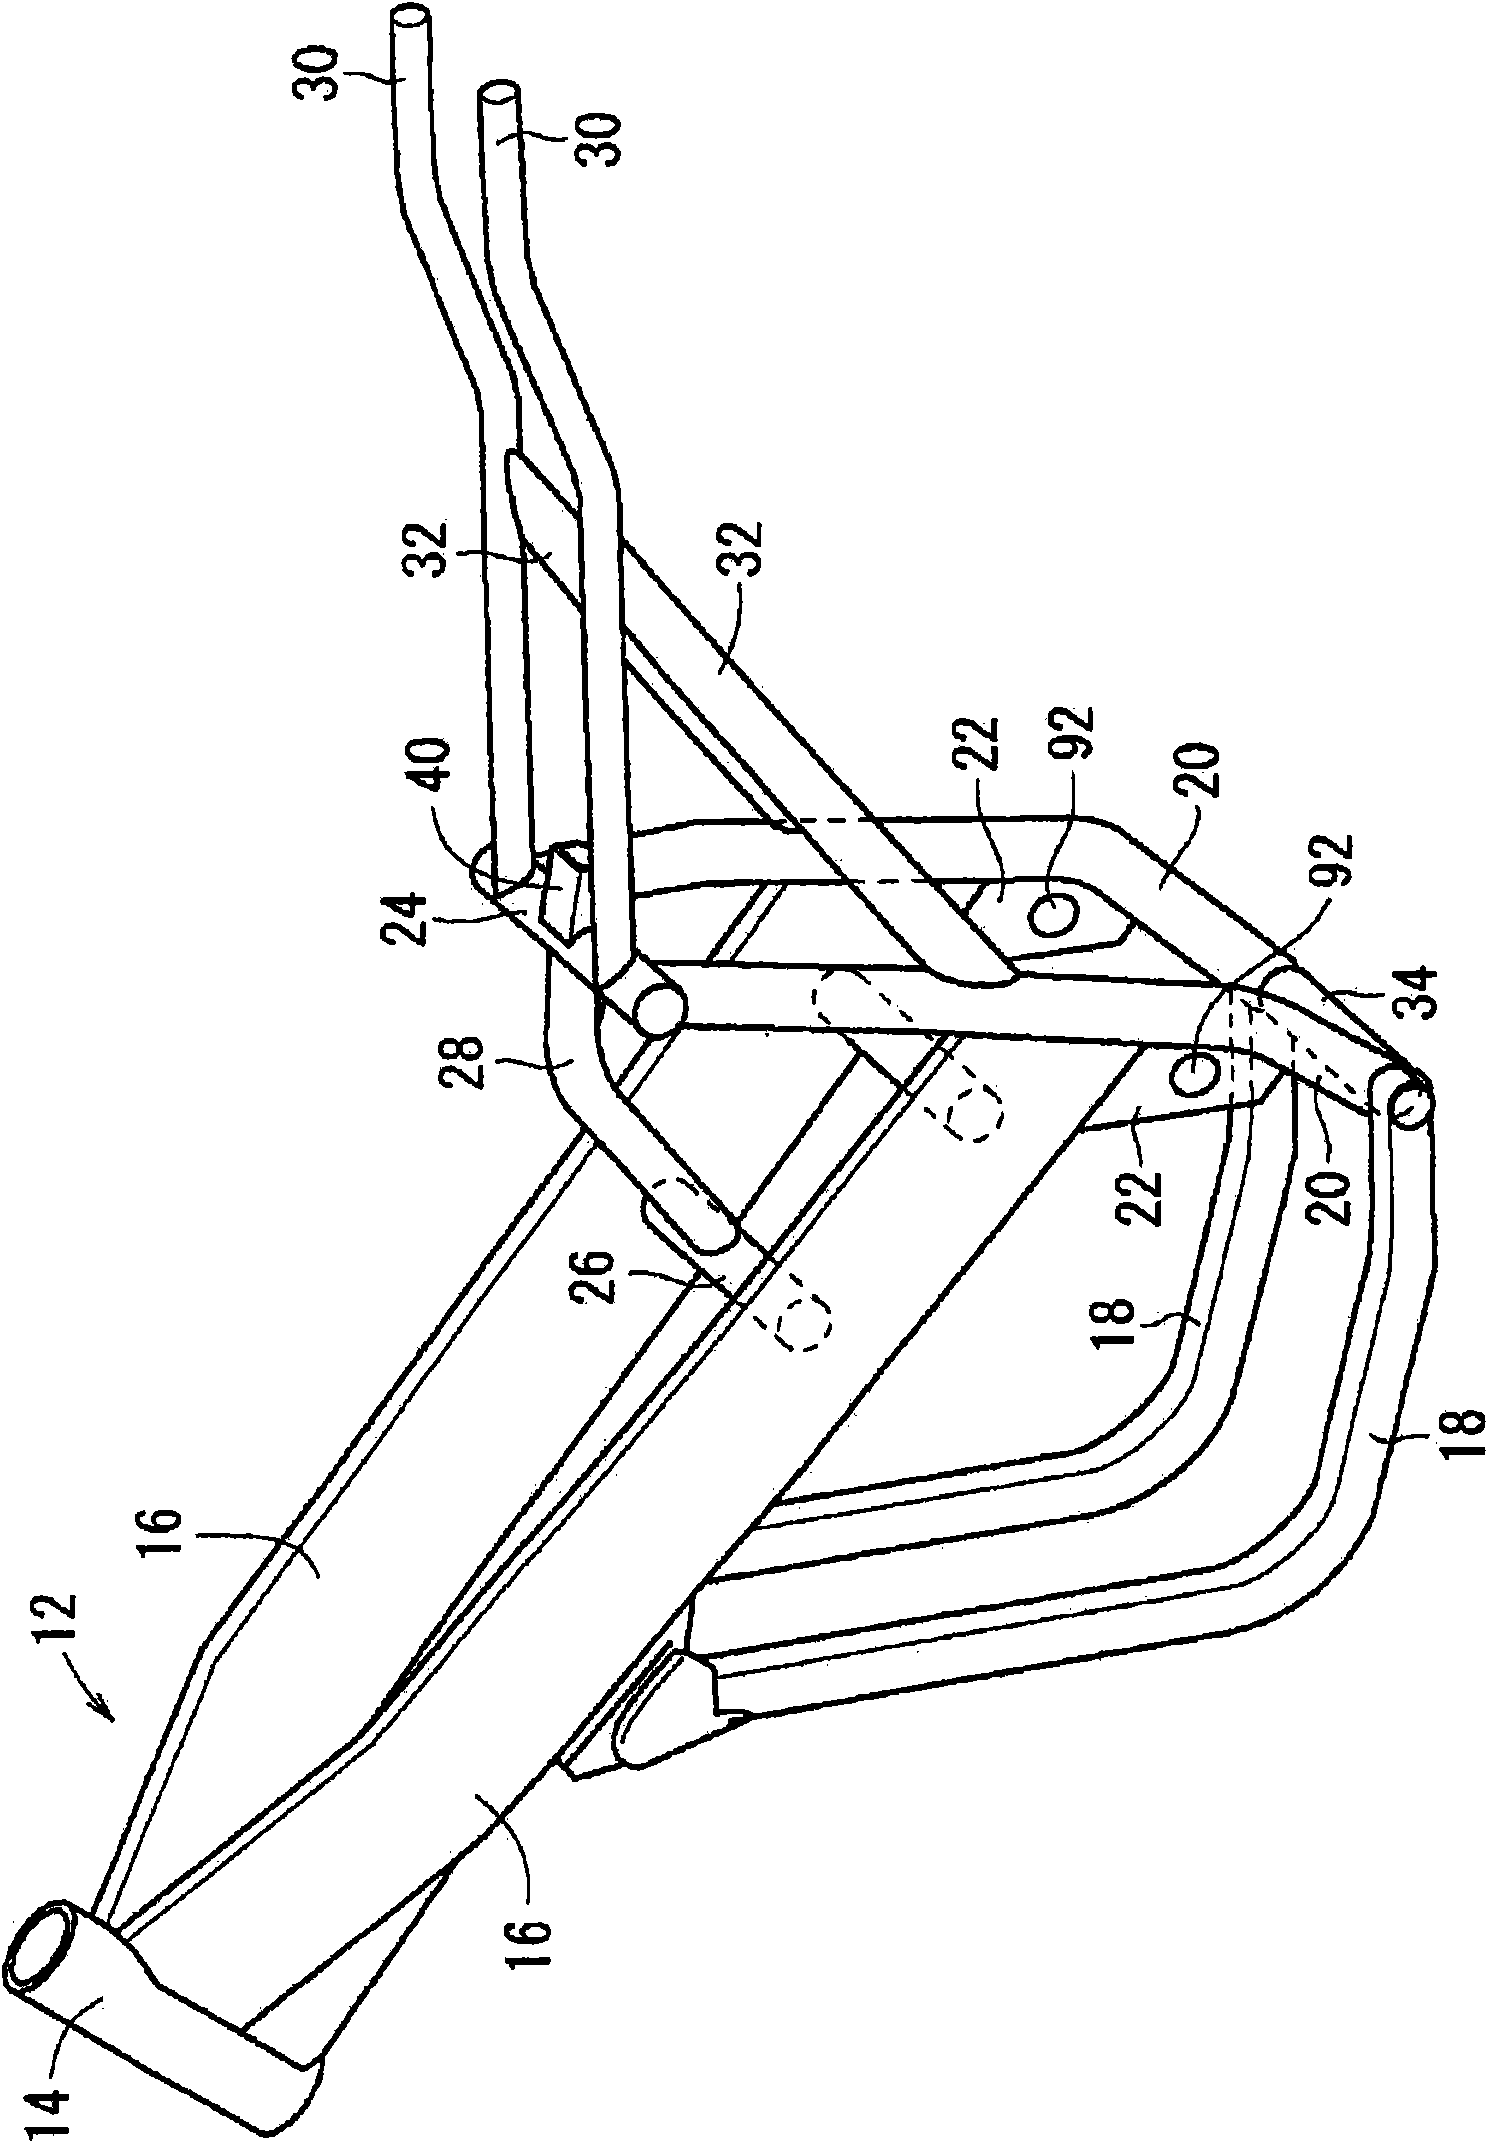 Frame structure of two-wheel motorcycle